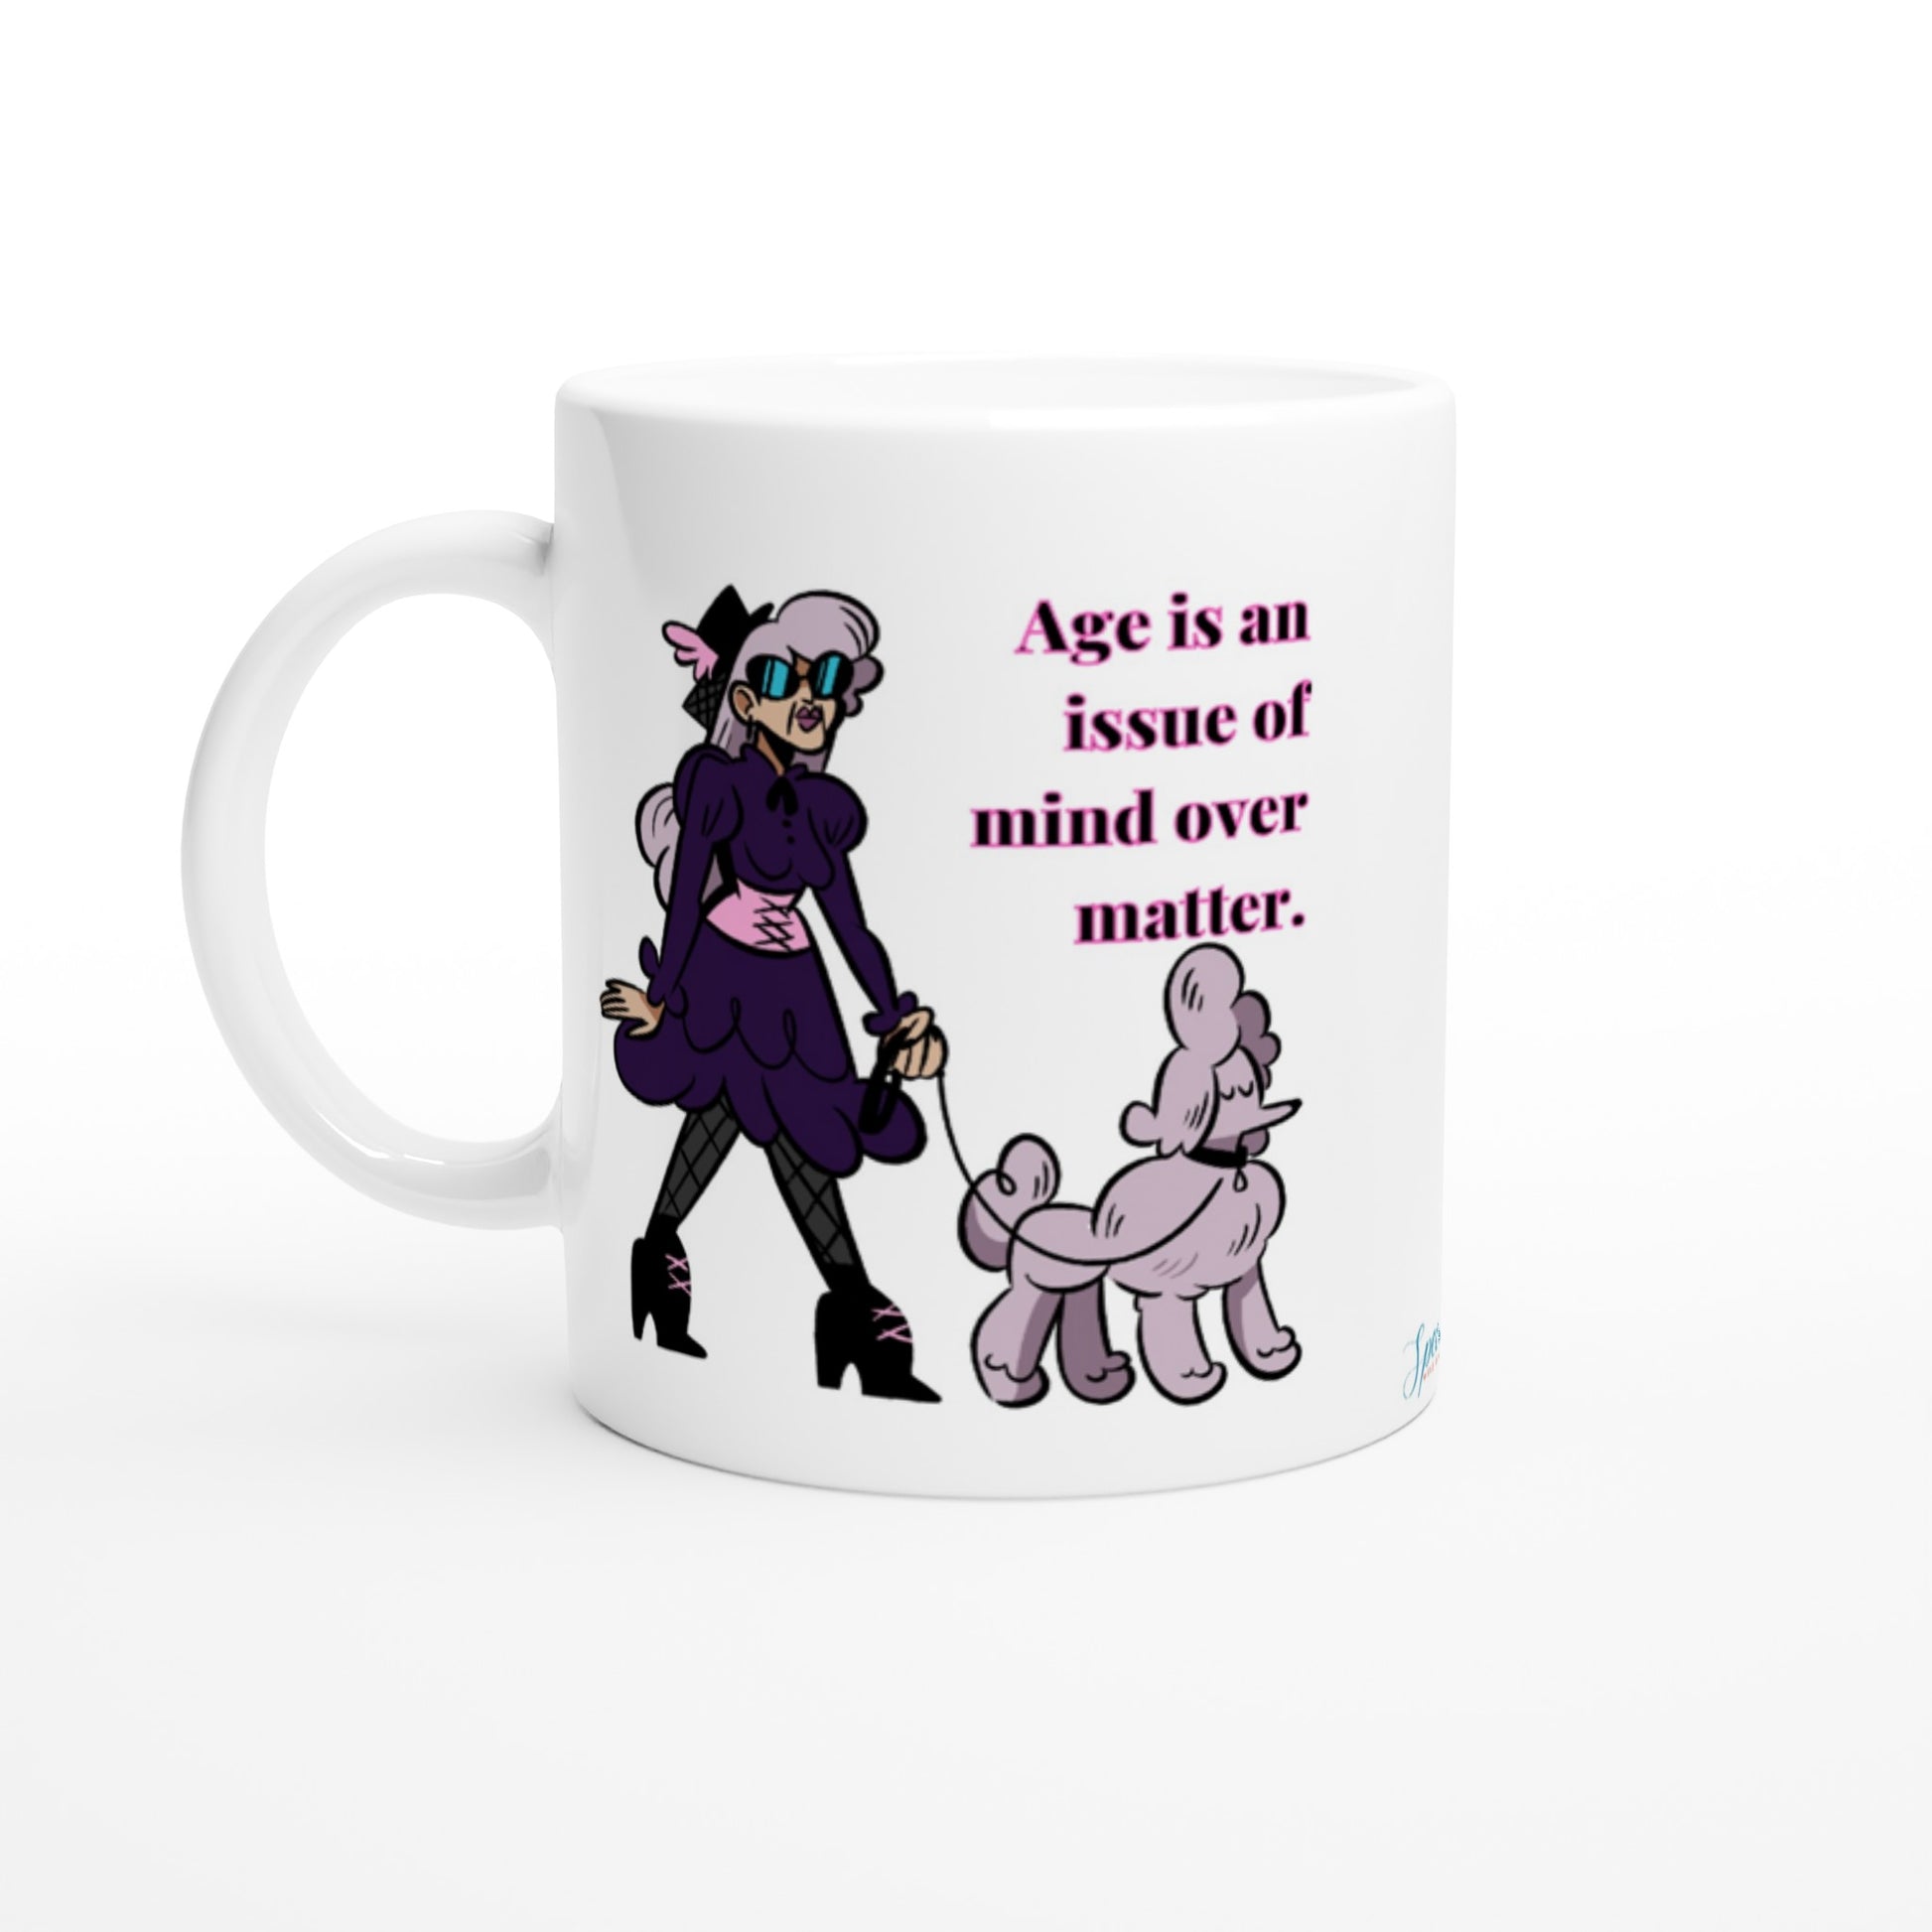 Mark Twain "Age is mind over matter" 11 oz. Mug front view